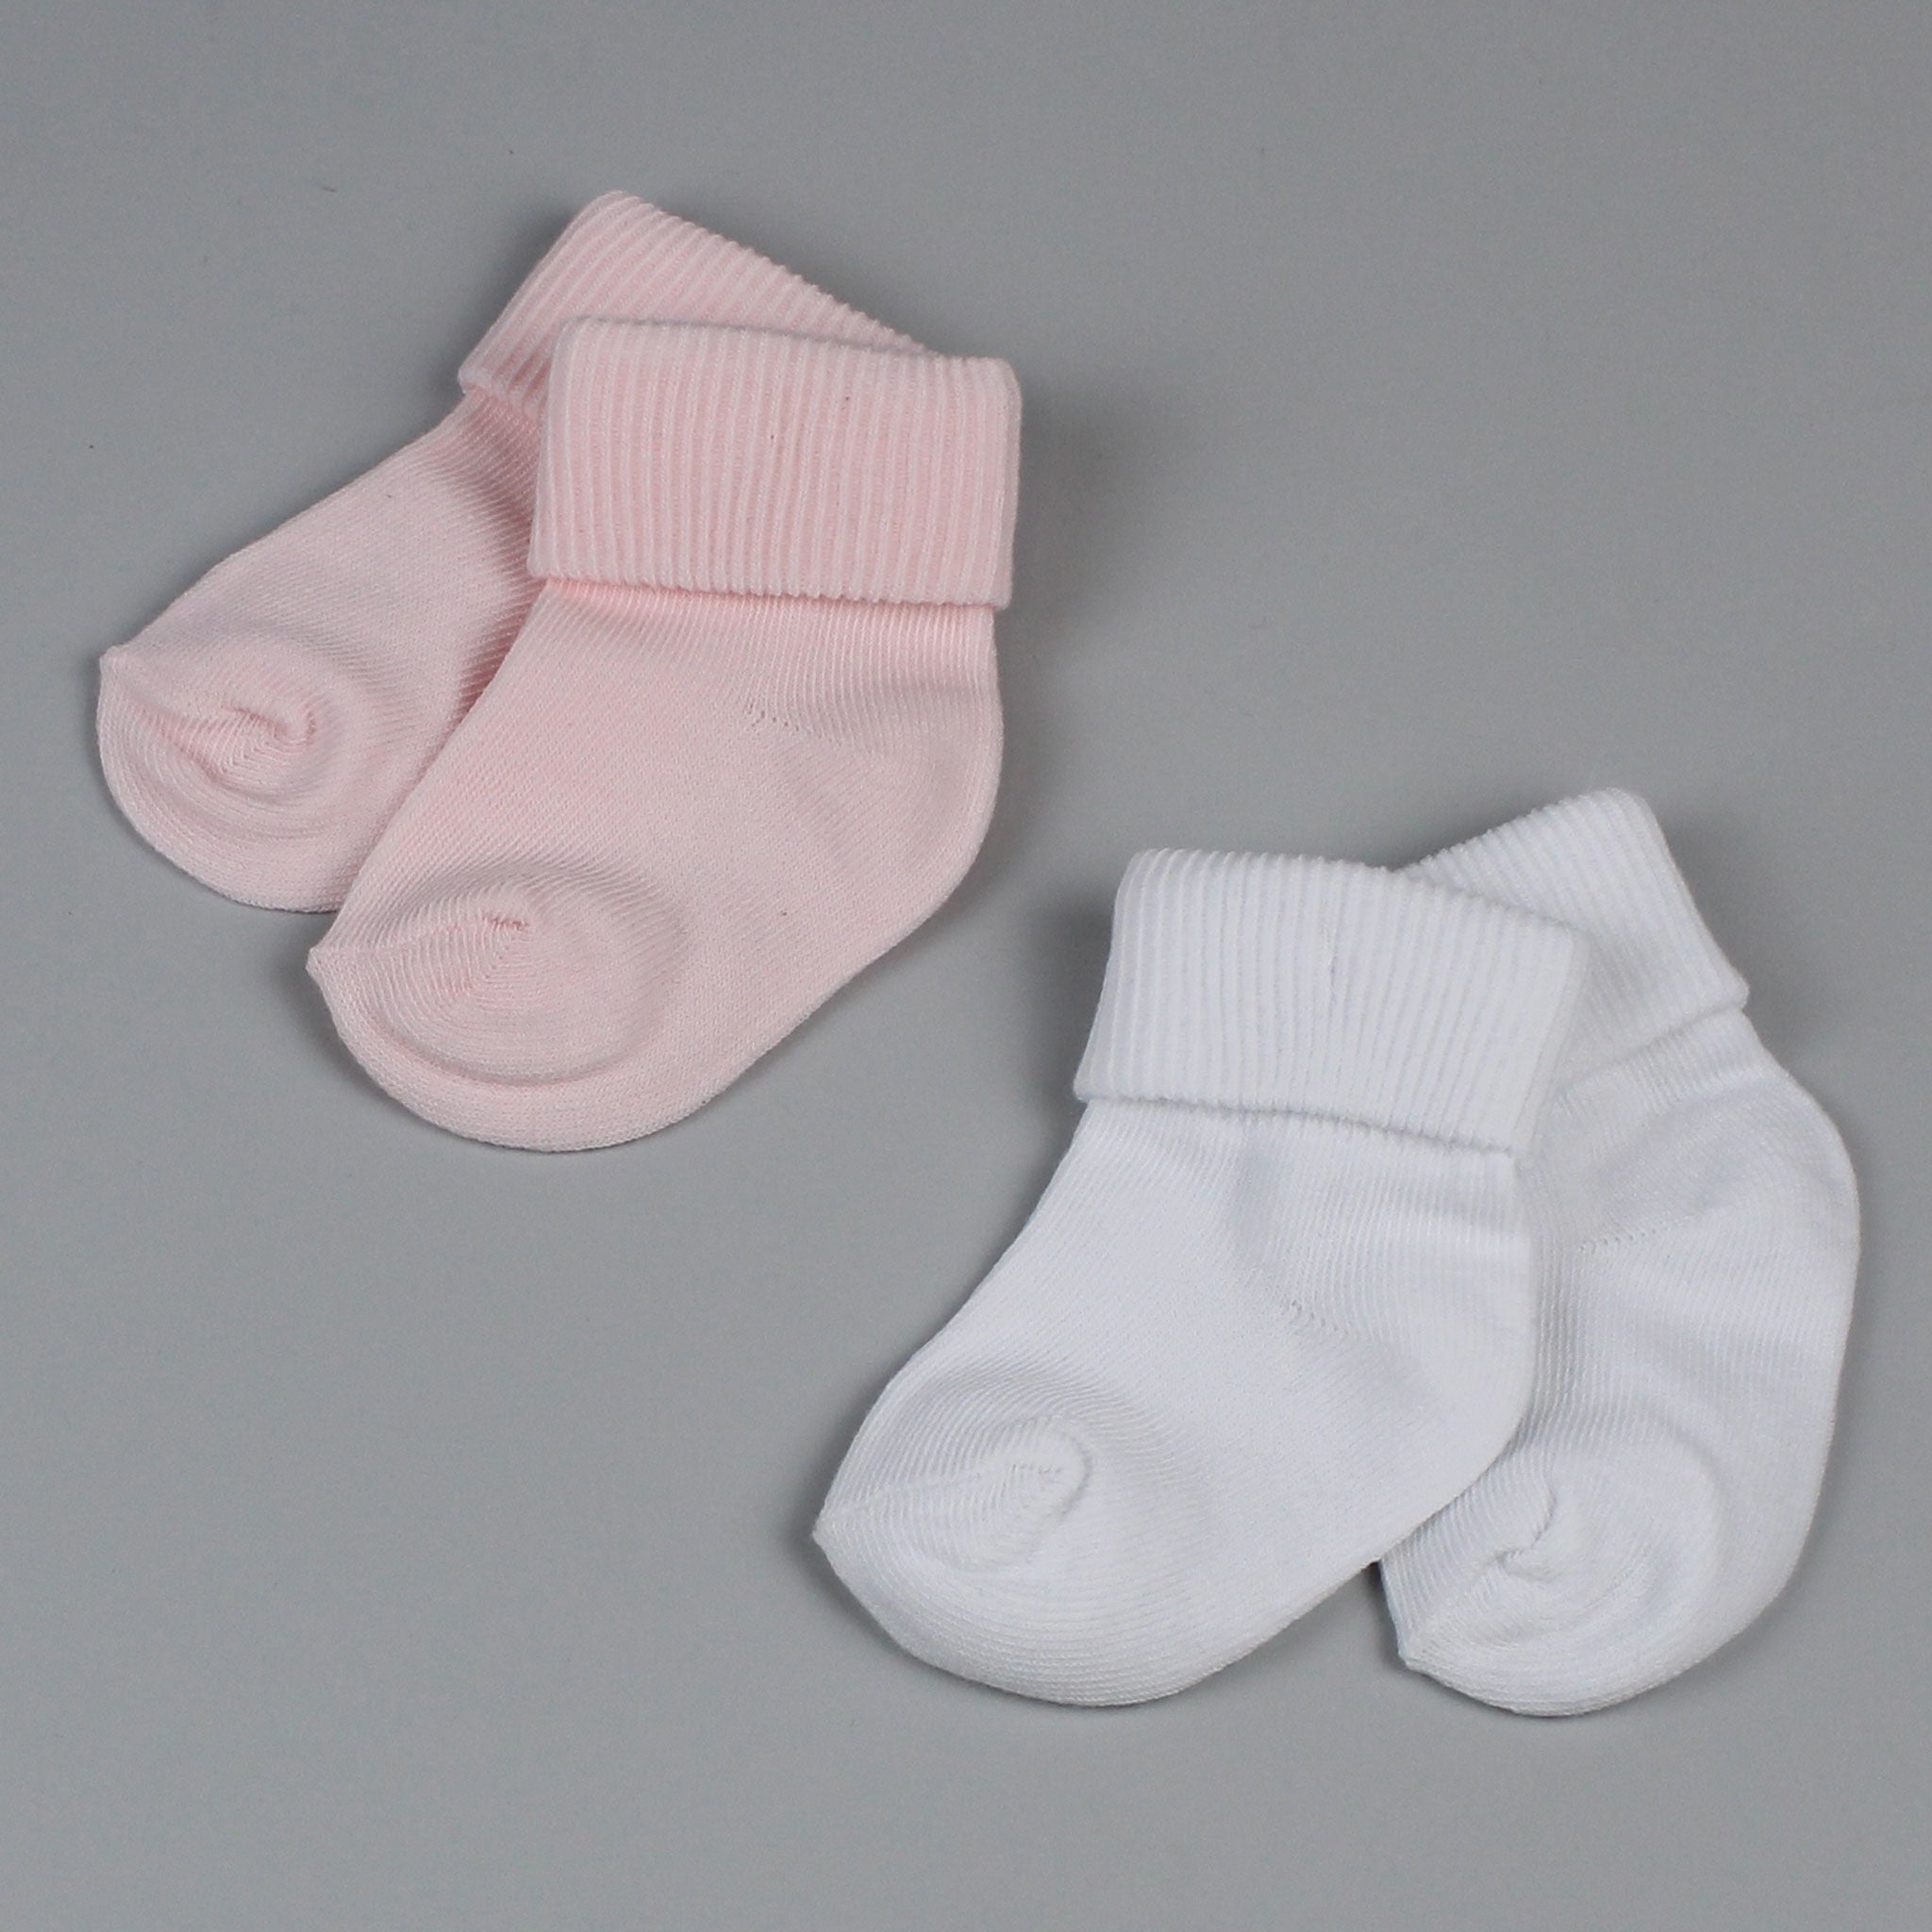 Two Pack Baby Girl Ankle Socks - White / Pink - Pex Roma